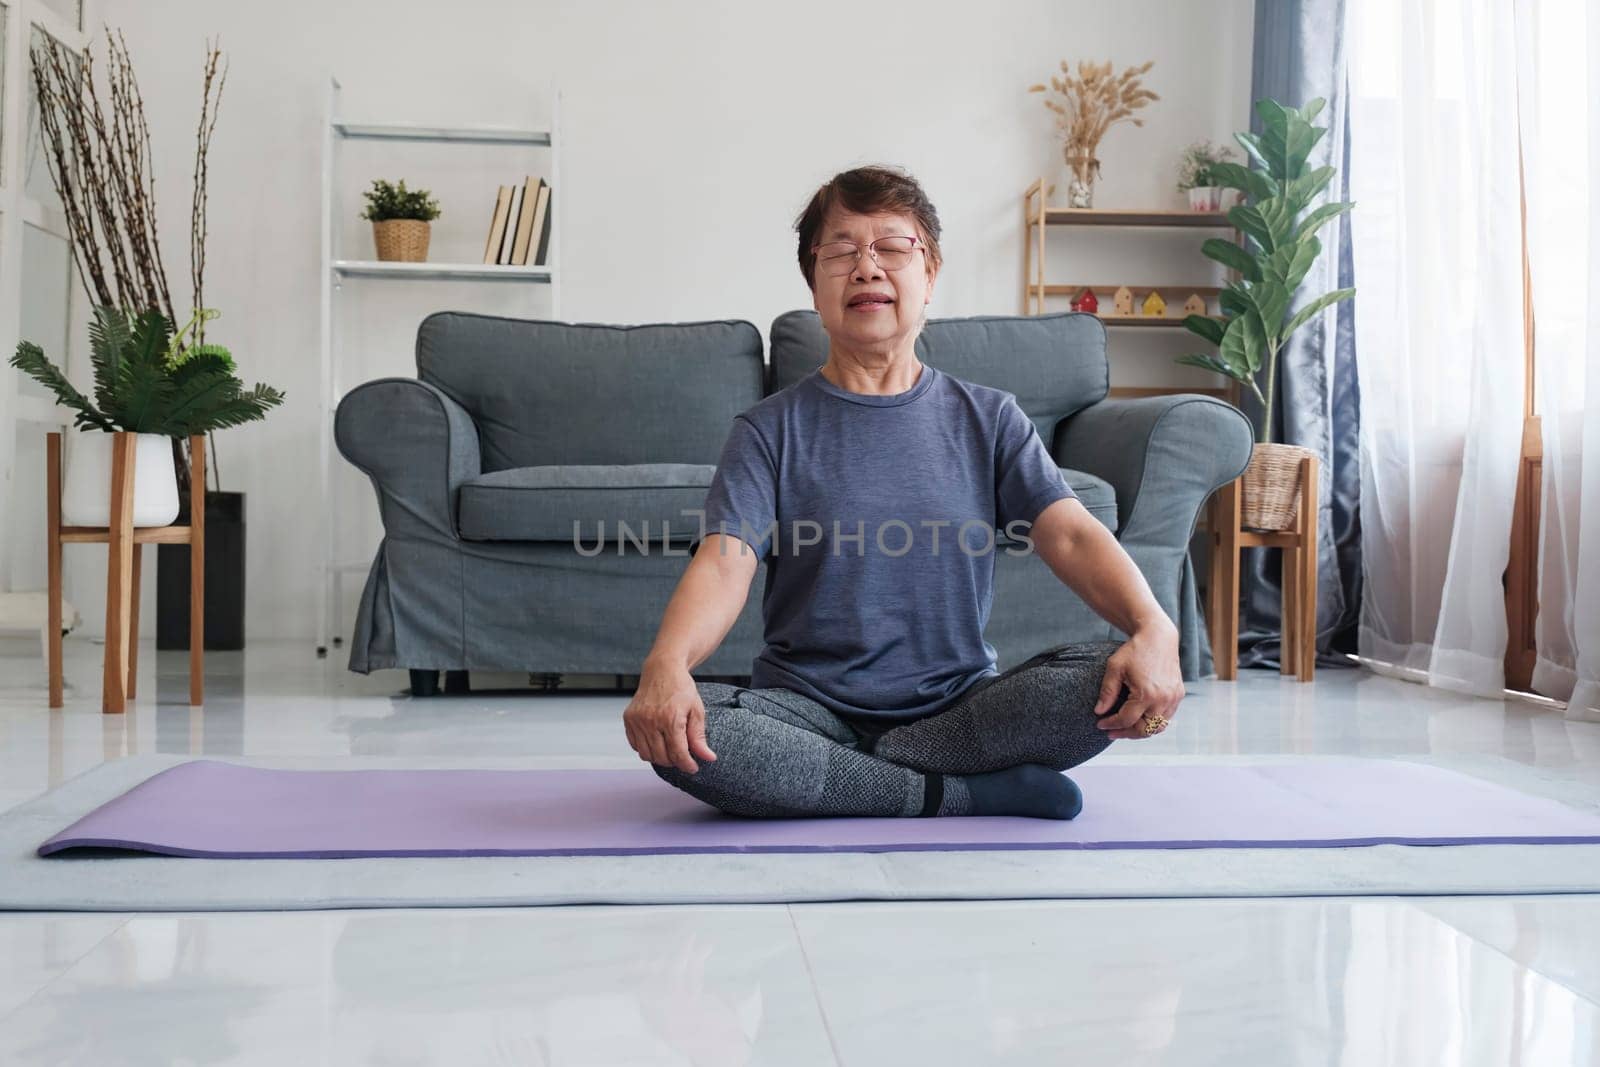 A senior woman finds inner peace through yoga and meditation at home, embracing relaxation and tranquility of the mind. Calm barefoot middle aged female sitting on carpet in half lotus posture, making mudra gesture and closing eyes, having peaceful facial expression, doing mindful meditation, concentrating on breathing.